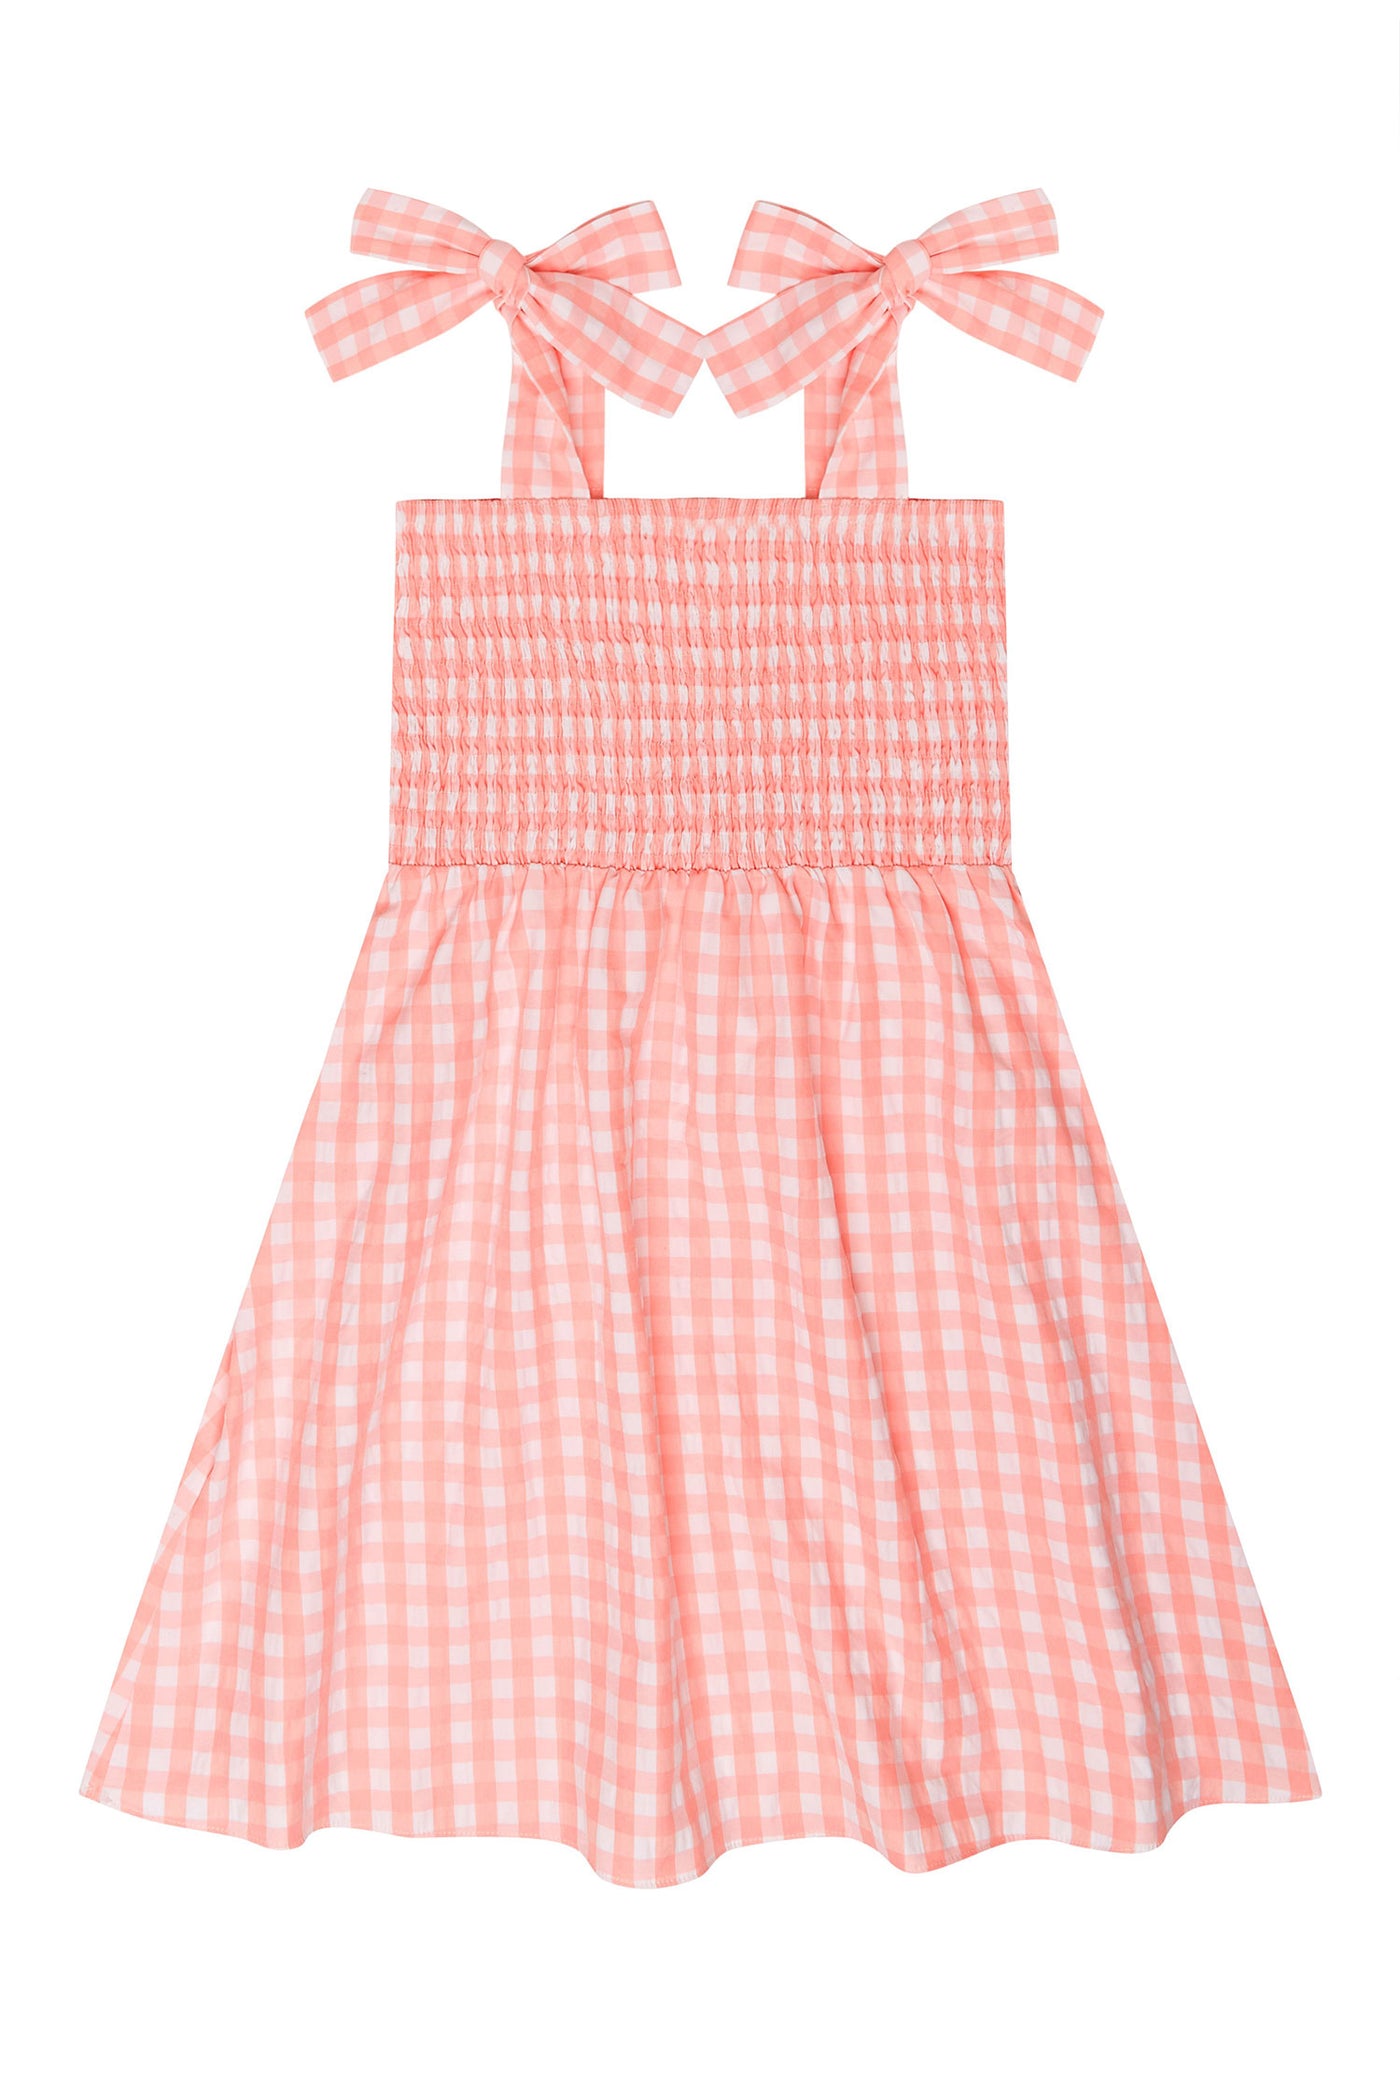 Pink and white gingham dress